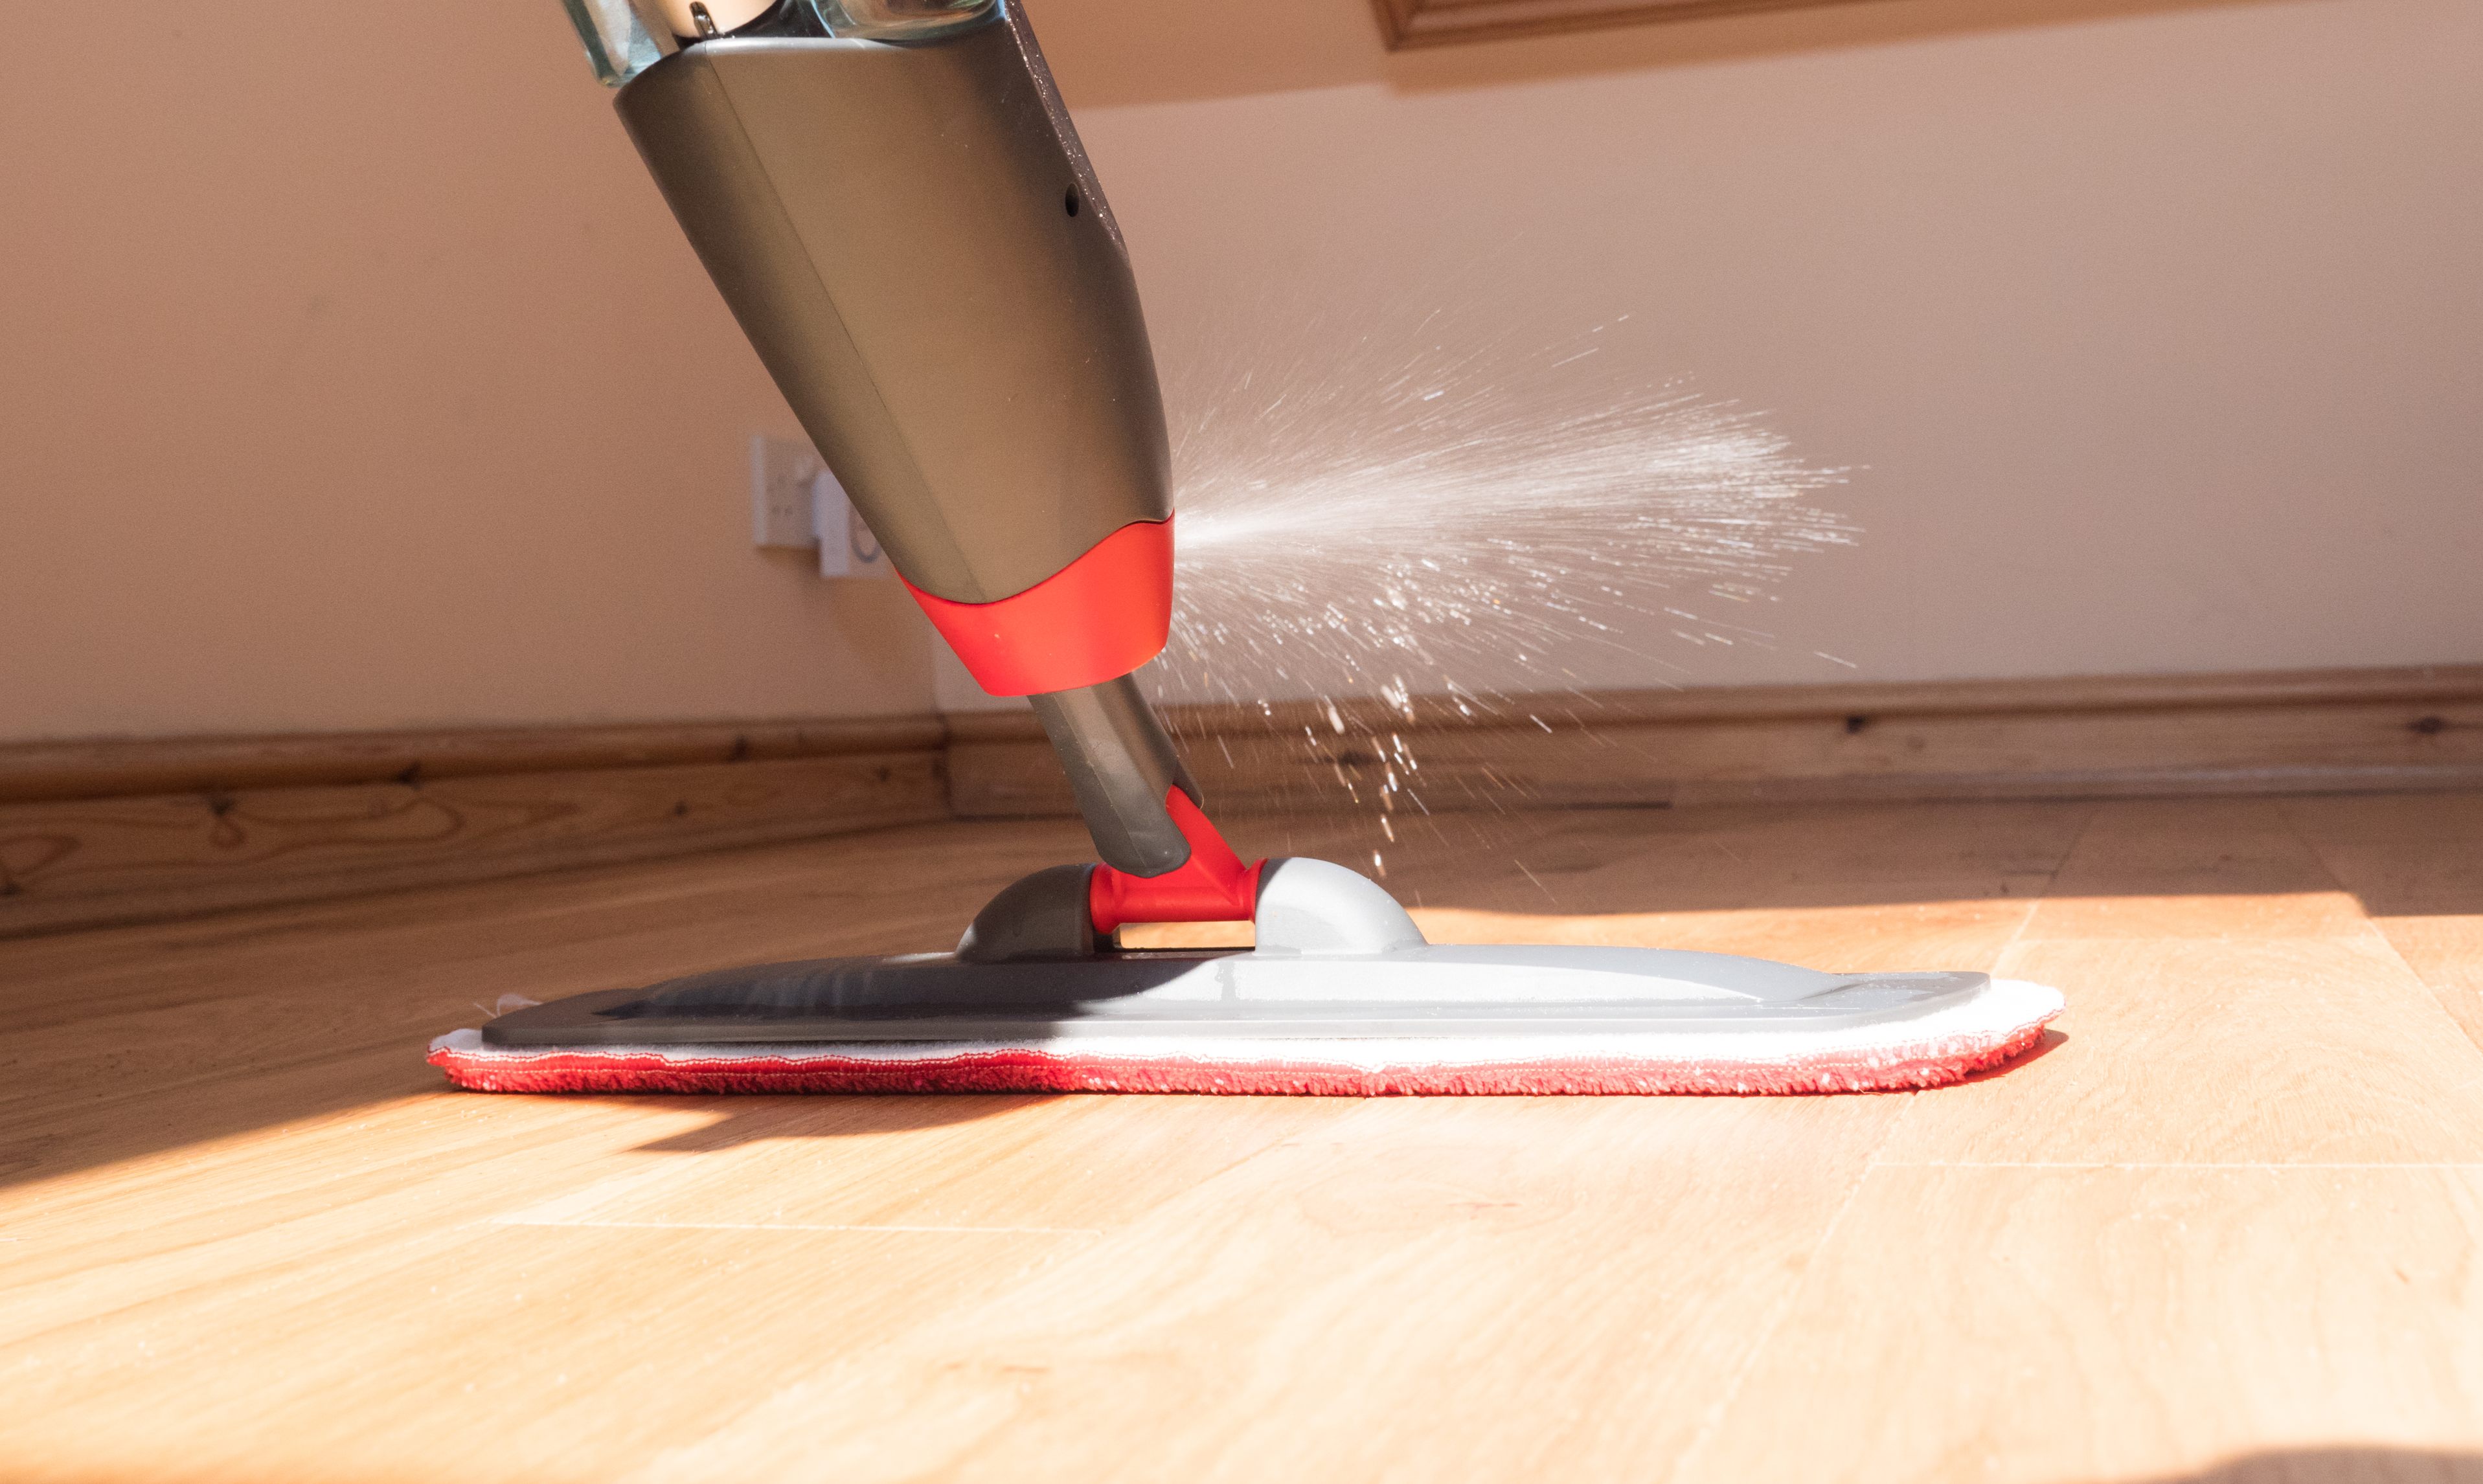 Caring for wooden flooring: the do’s and don'ts